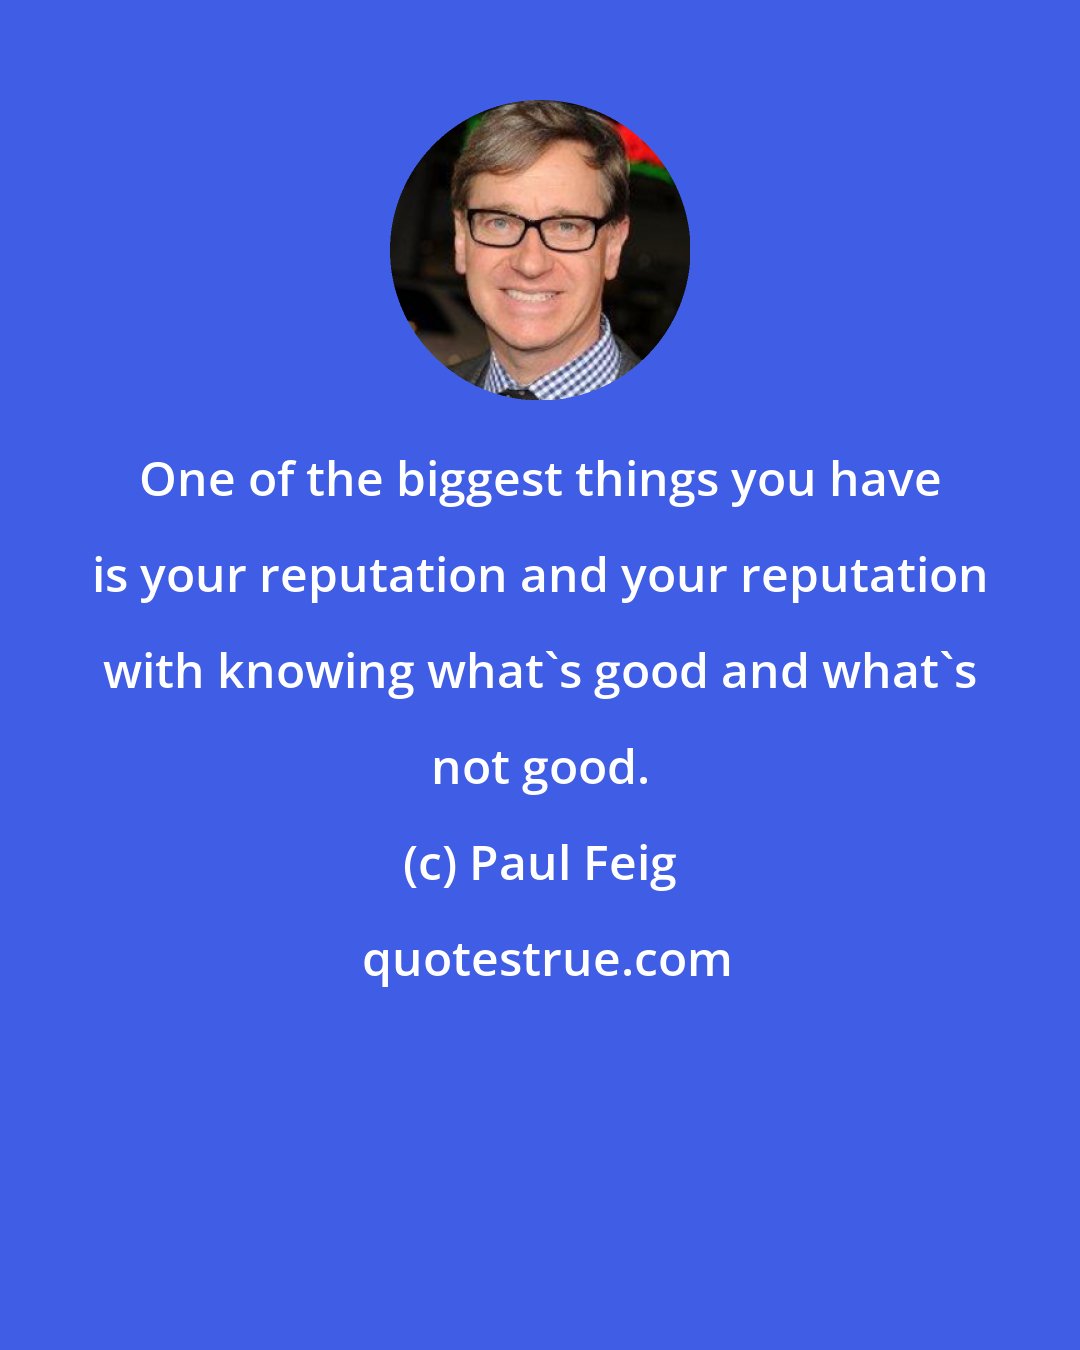 Paul Feig: One of the biggest things you have is your reputation and your reputation with knowing what's good and what's not good.